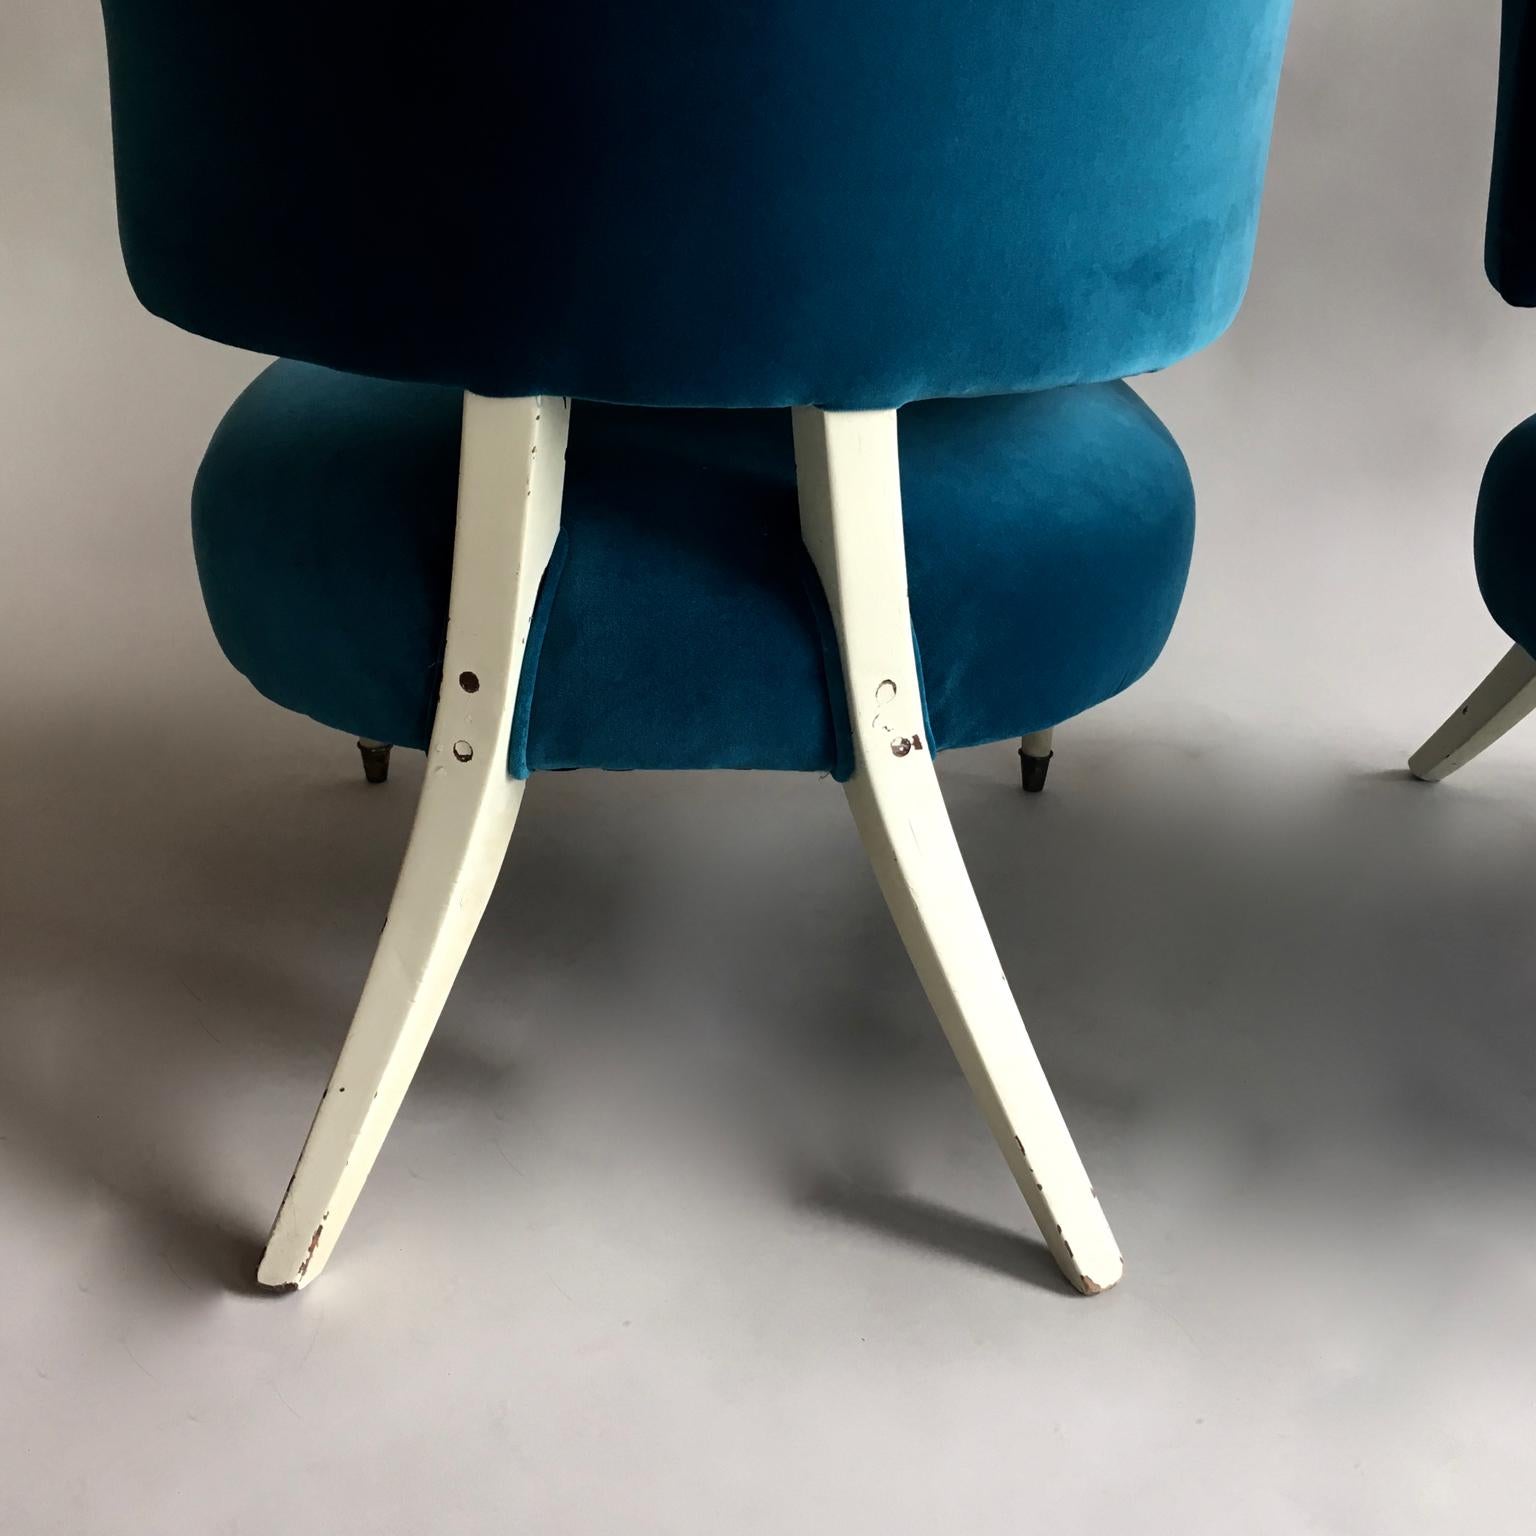 Painted Slipper Chairs Chauffeuses Overpainted White, Blue Velour Upholstery, 1950s Pair